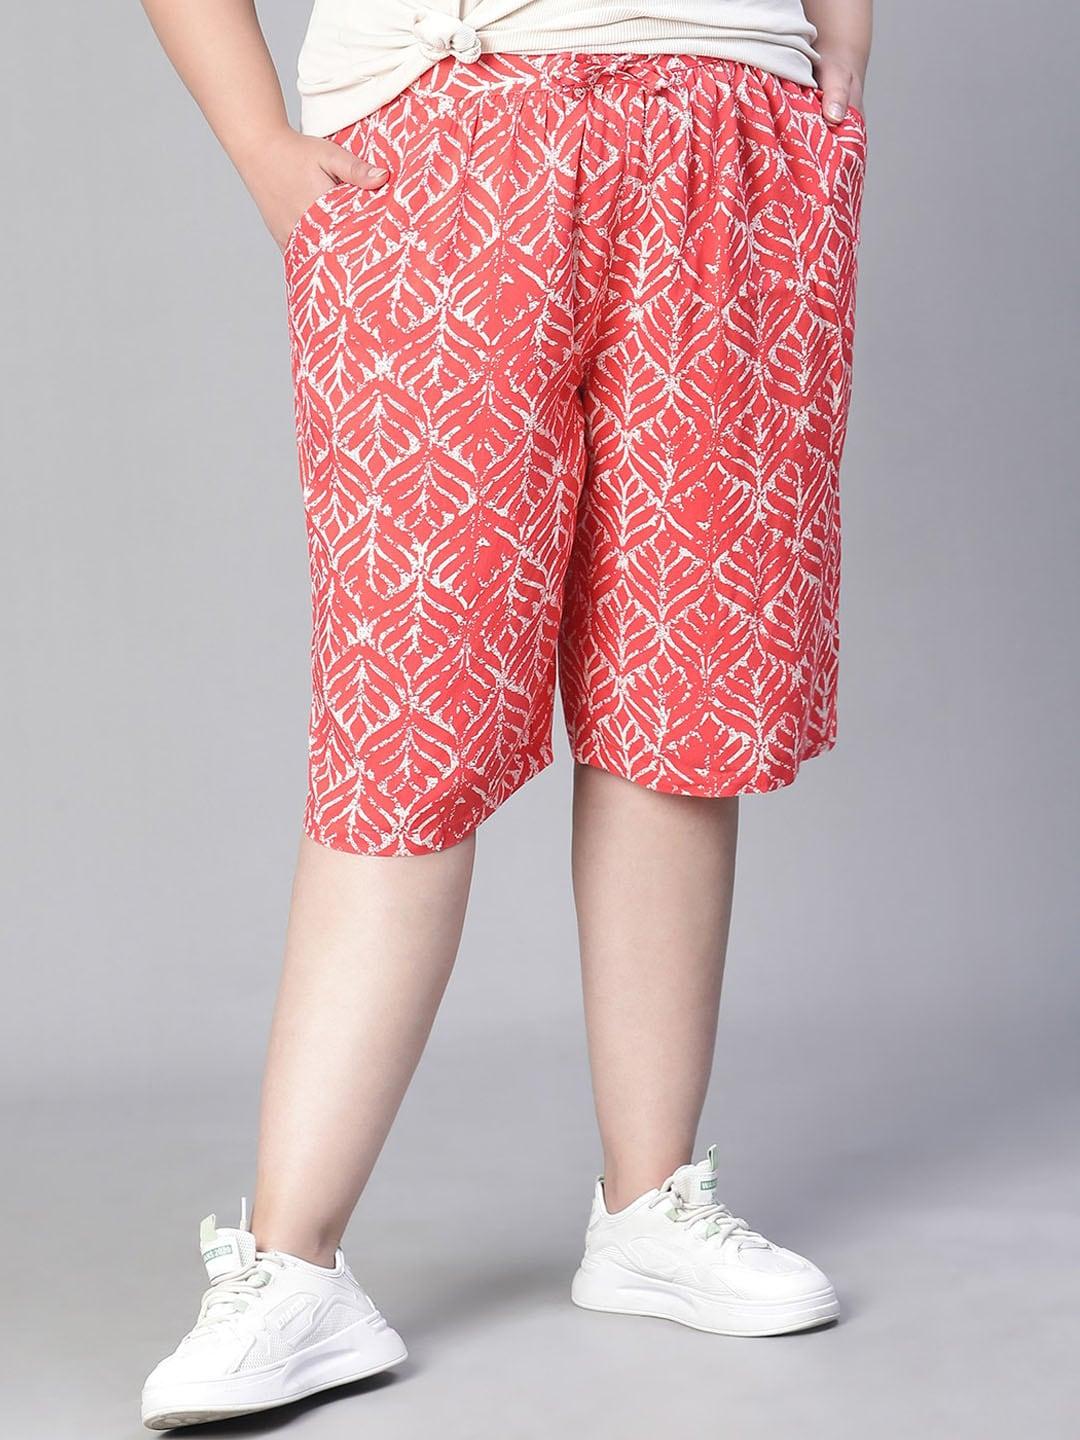 oxolloxo-women-floral-printed-high-rise-shorts